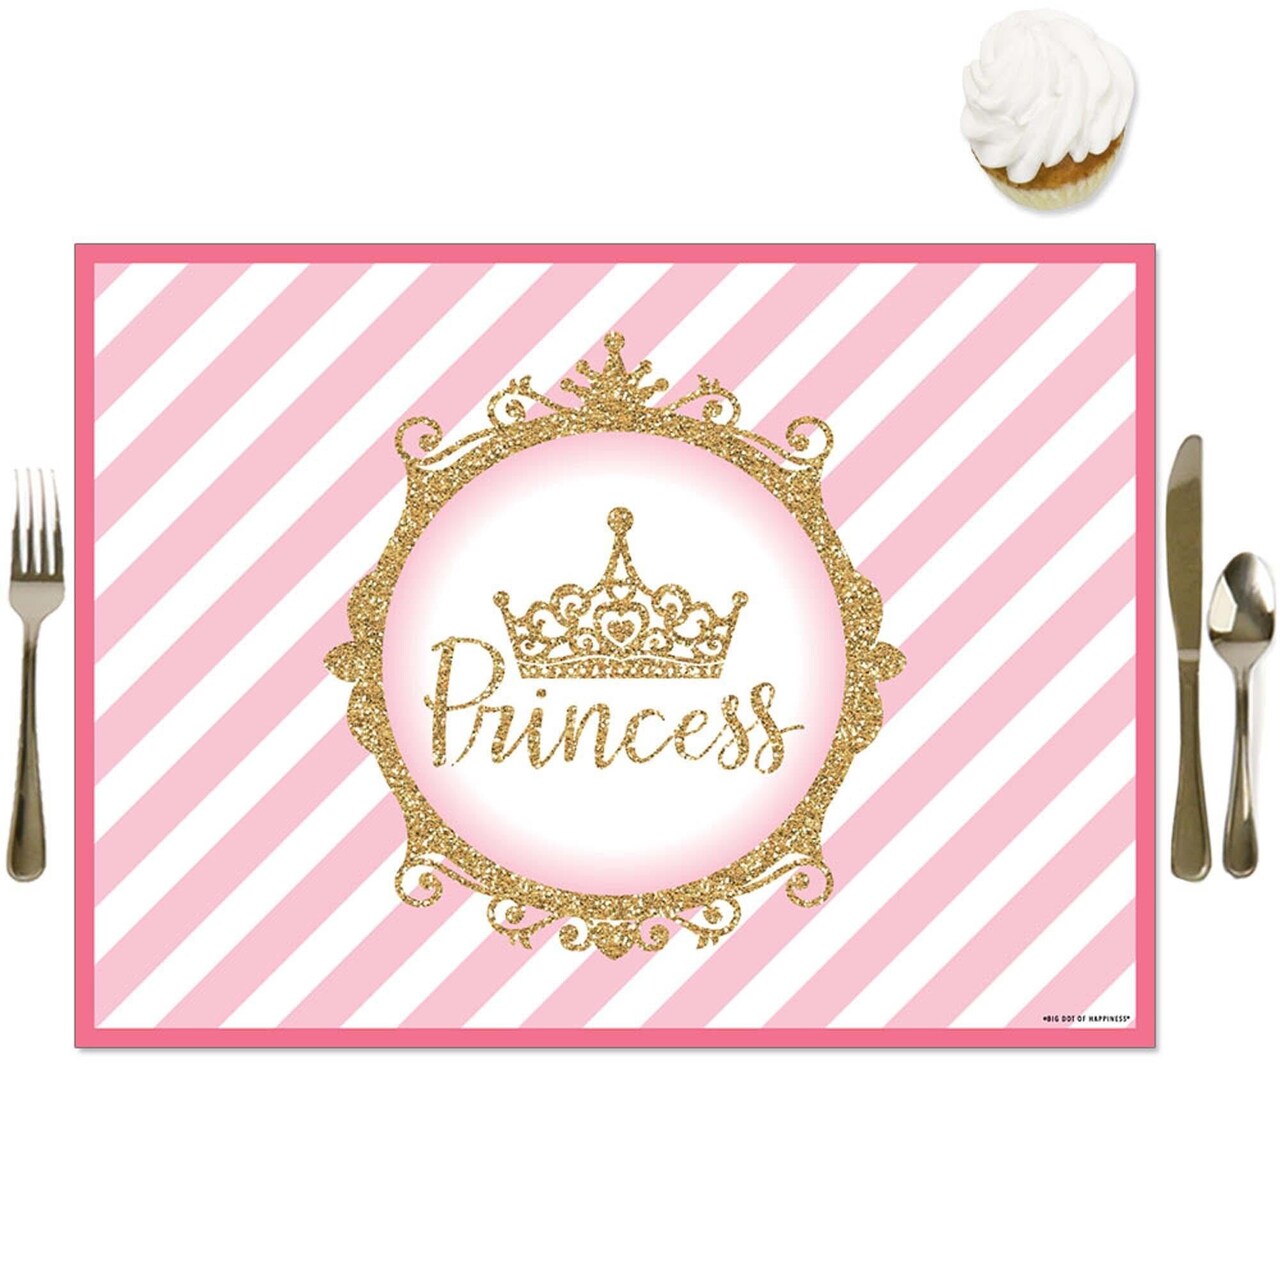 Big Dot of Happiness Little Princess Crown - Party Table Decorations - Pink and Gold Princess Baby Shower or Birthday Party Placemats - Set of 16